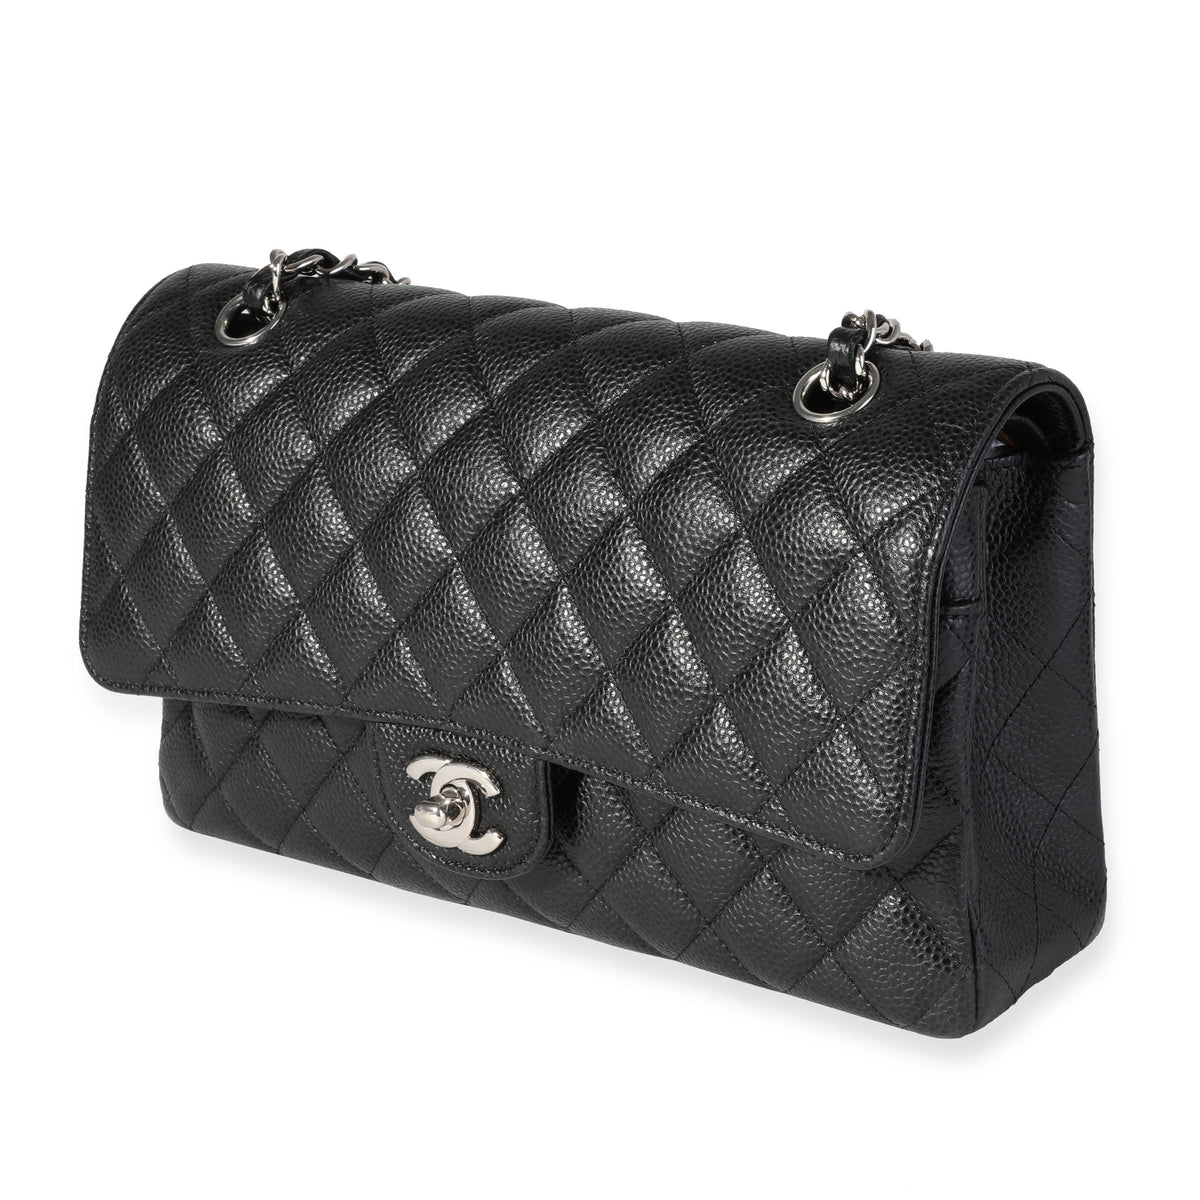 Chanel off-white quilted leather TIMELESS CLASSIC FLAP MEDIUM